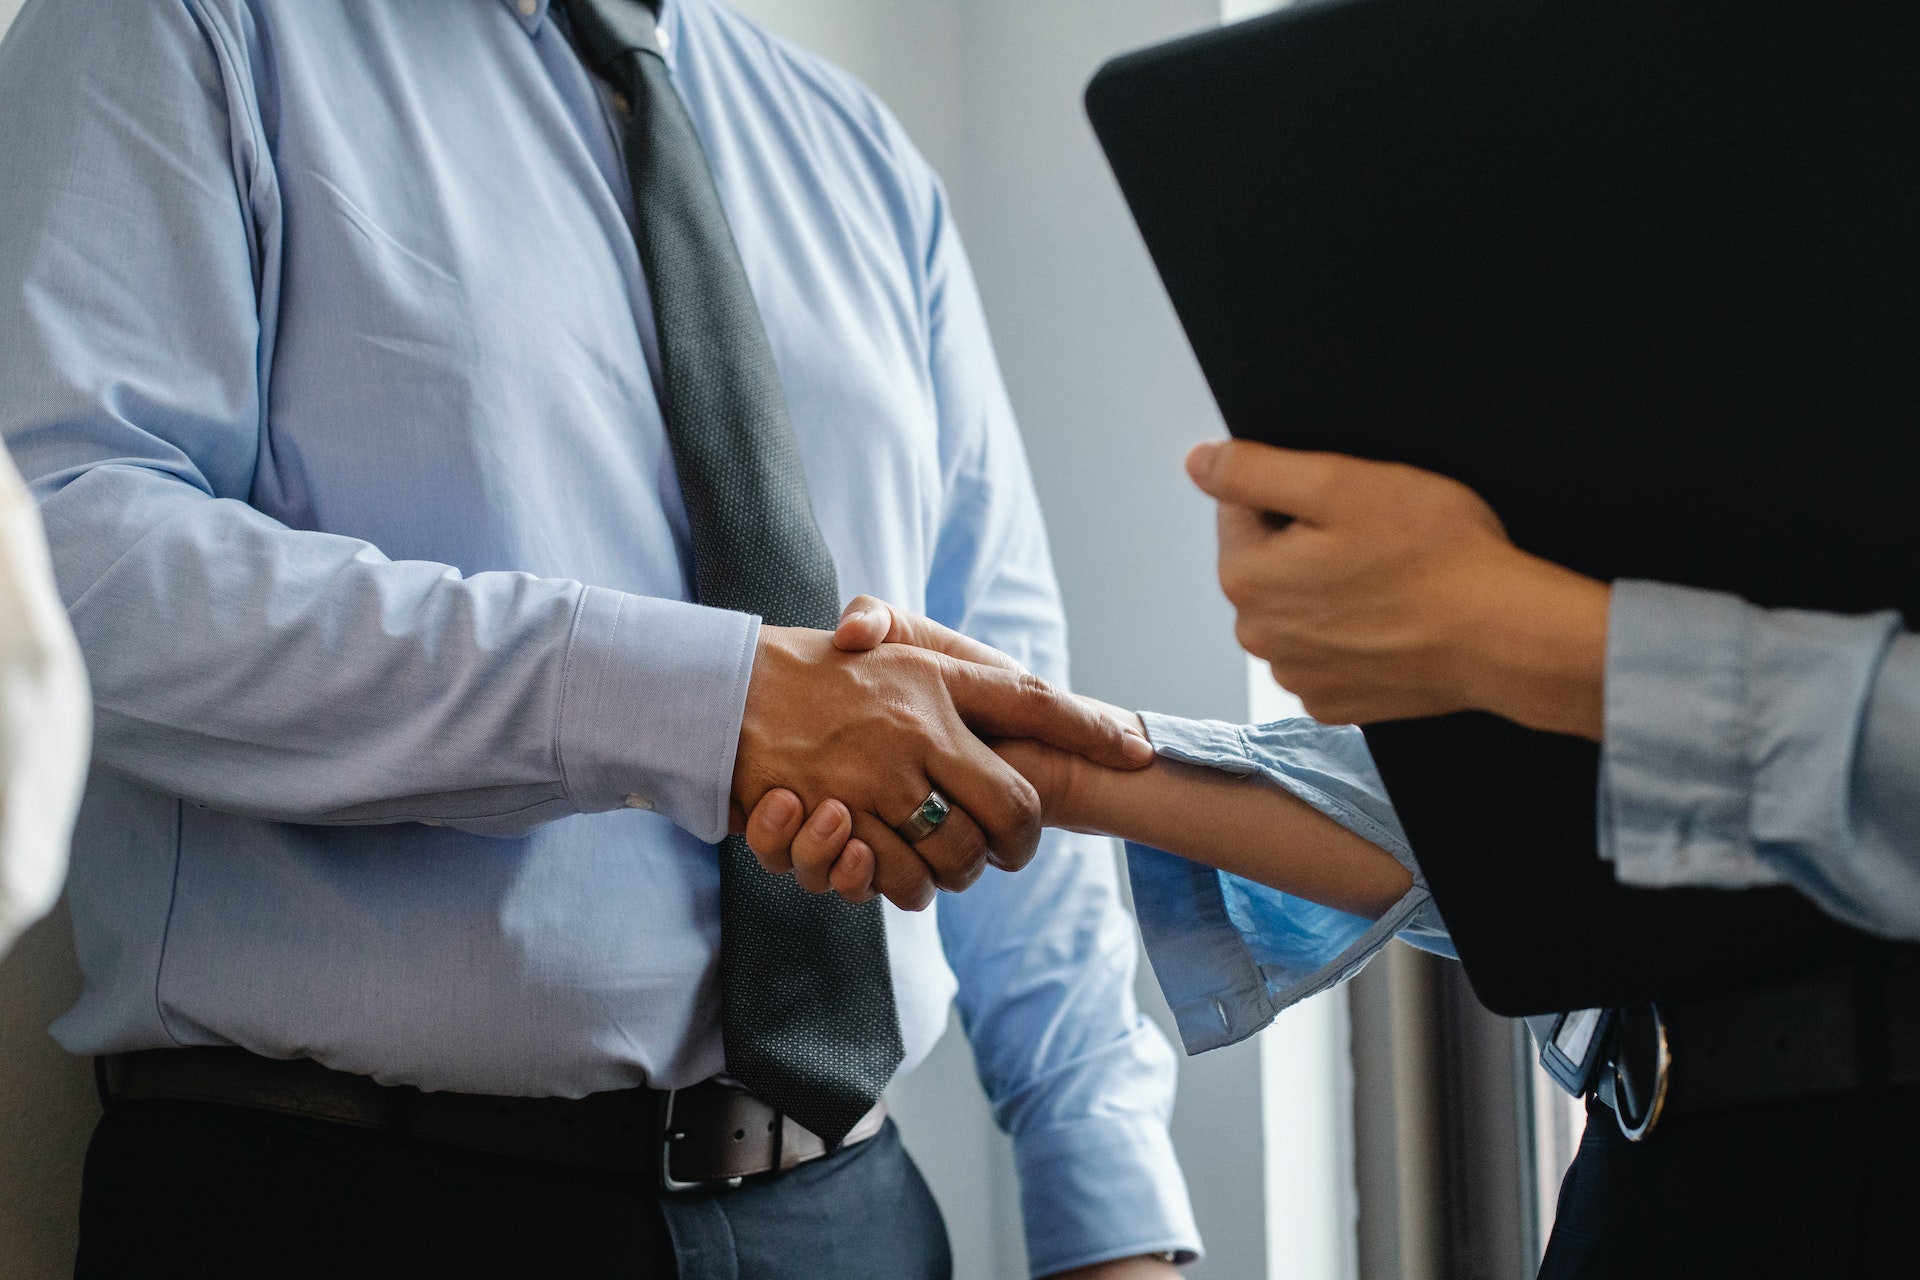 Learn the difference between business mergers and acquisitions with our guide. Both are strategies to increase a company's capabilities, but often misunderstood.